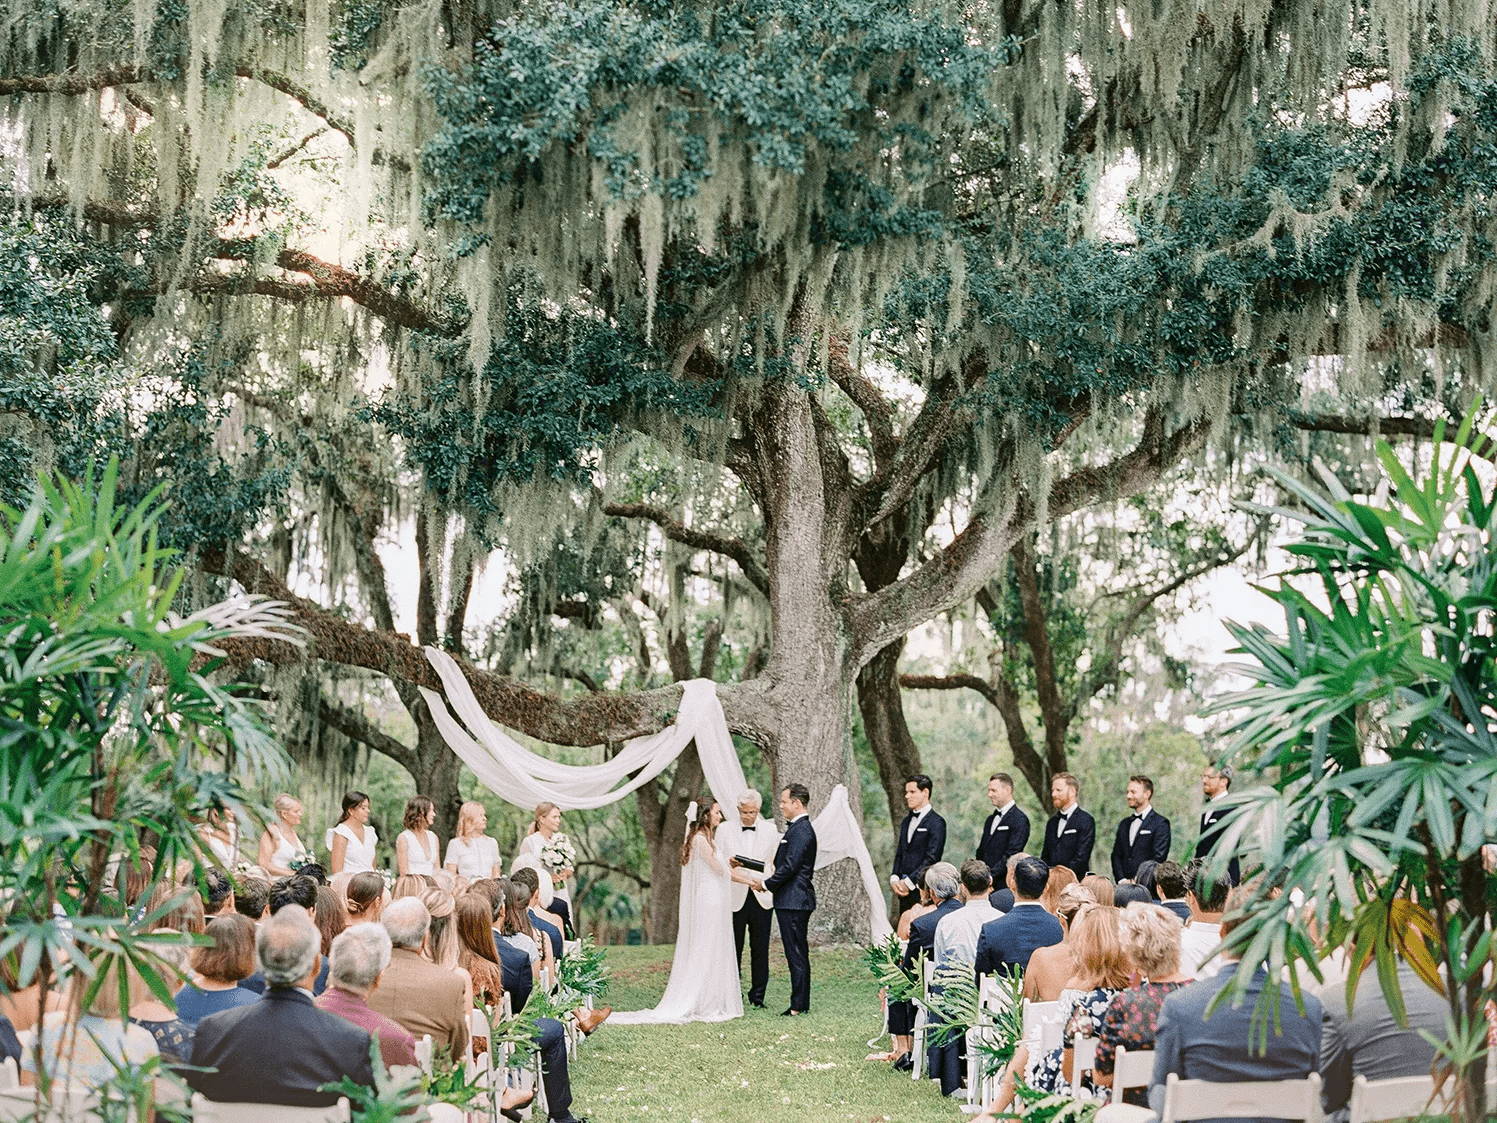 An outdoor wedding with guests present